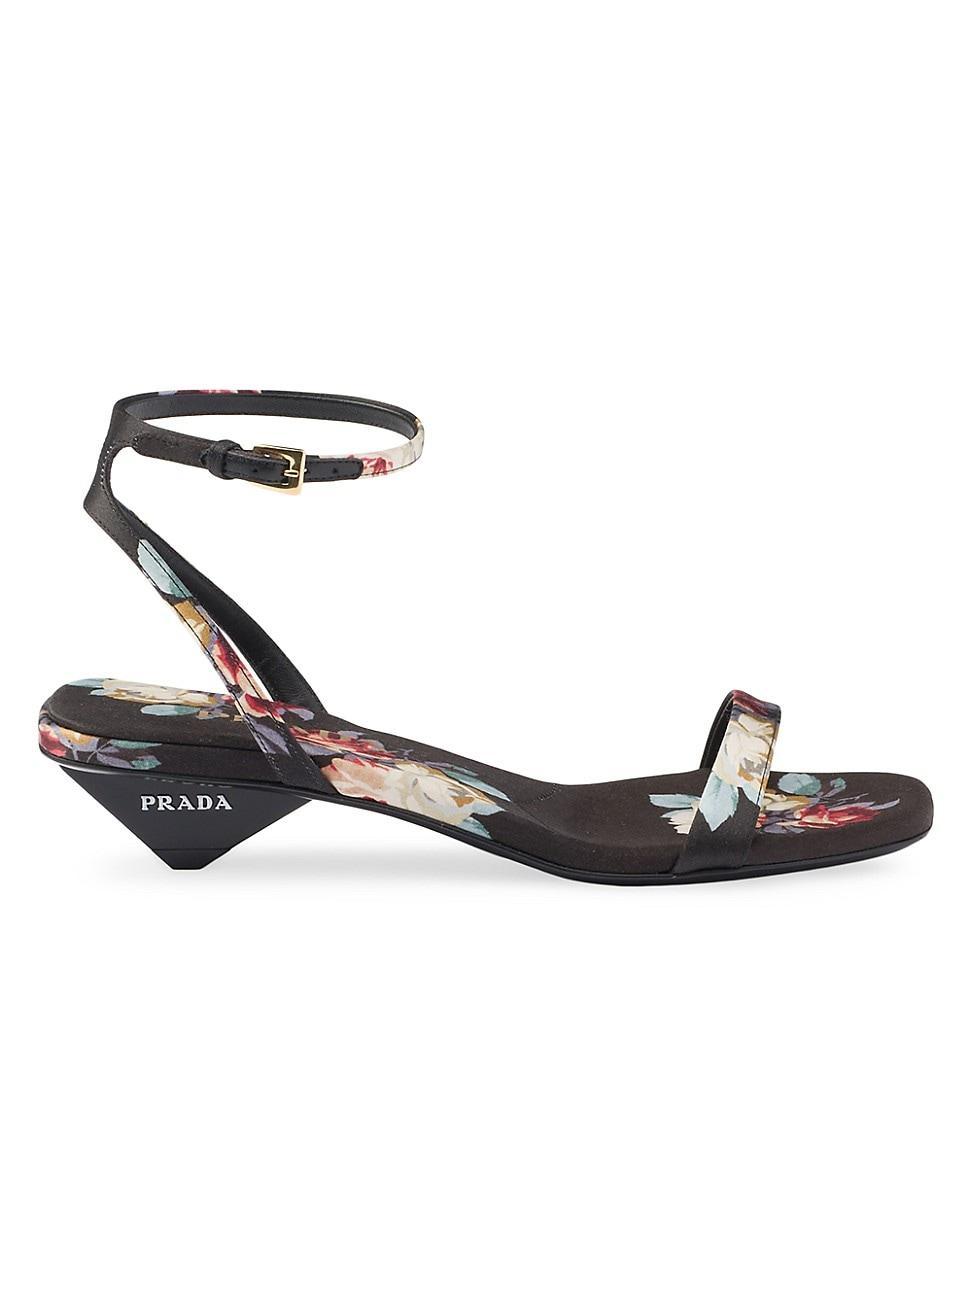 Womens Satin Sandals Product Image